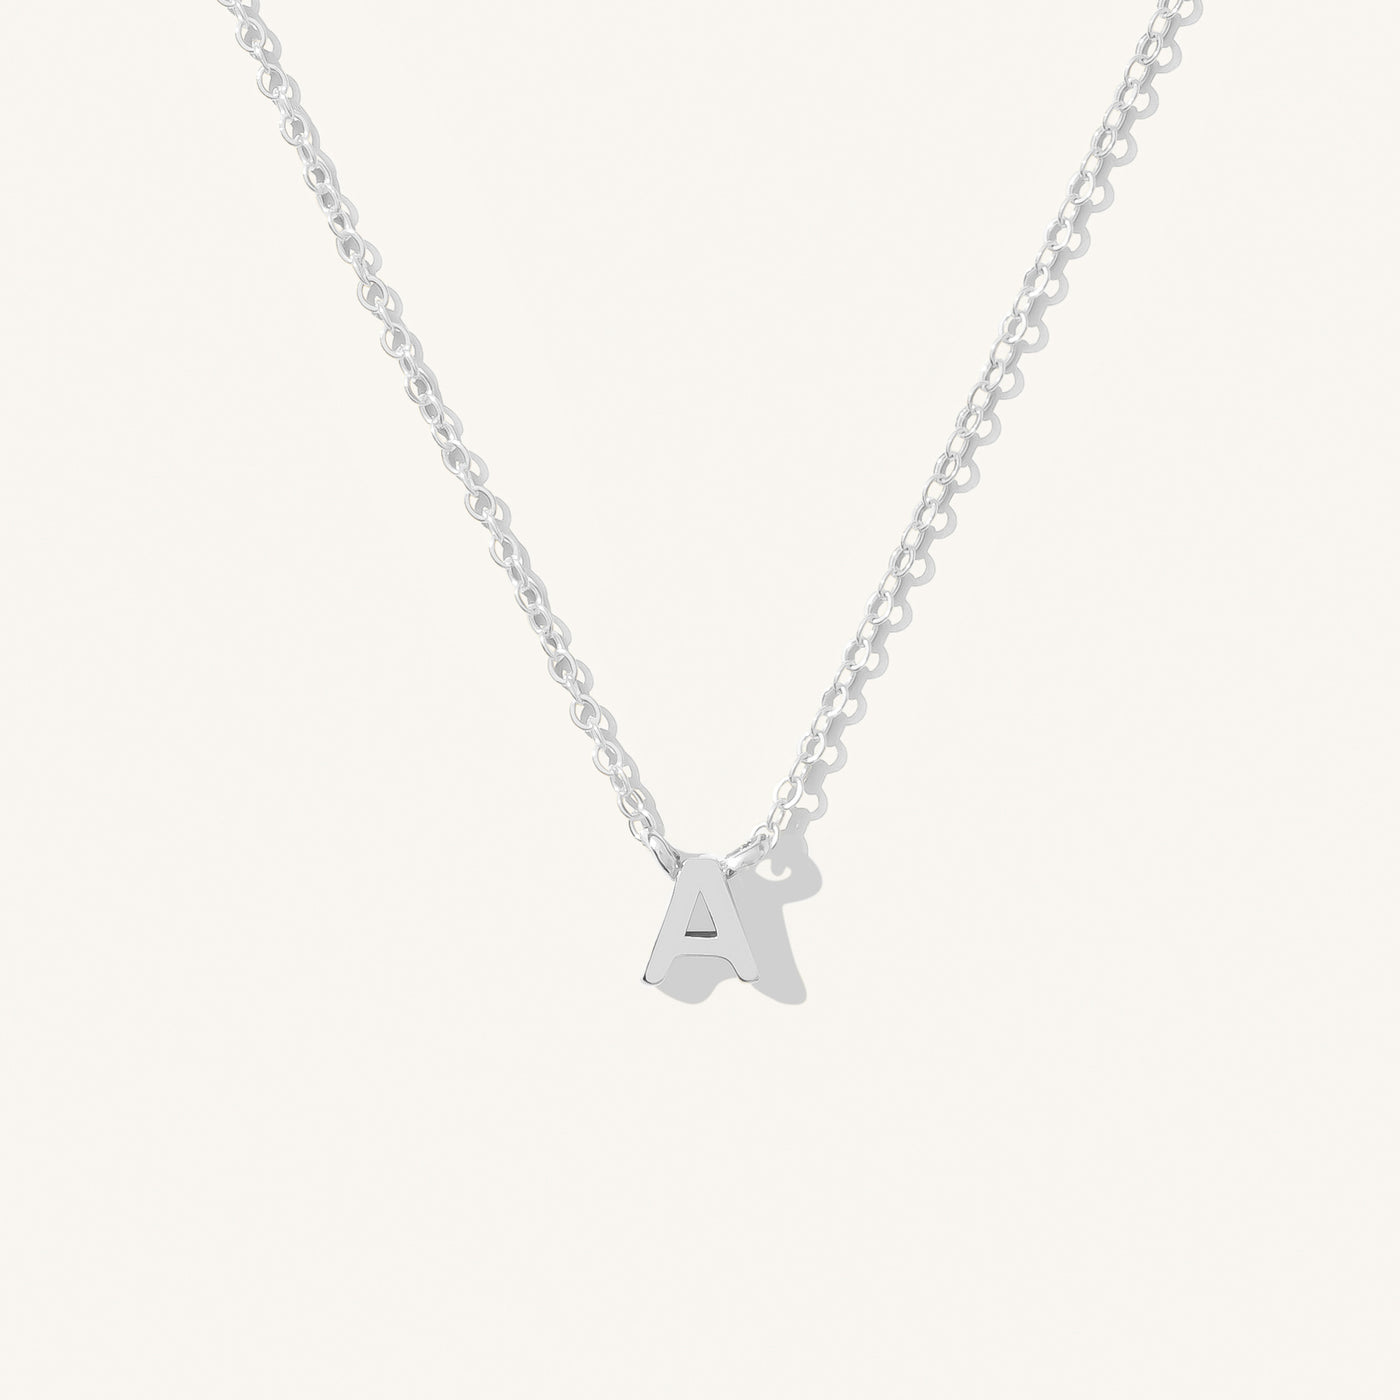 A Tiny Initial Necklace